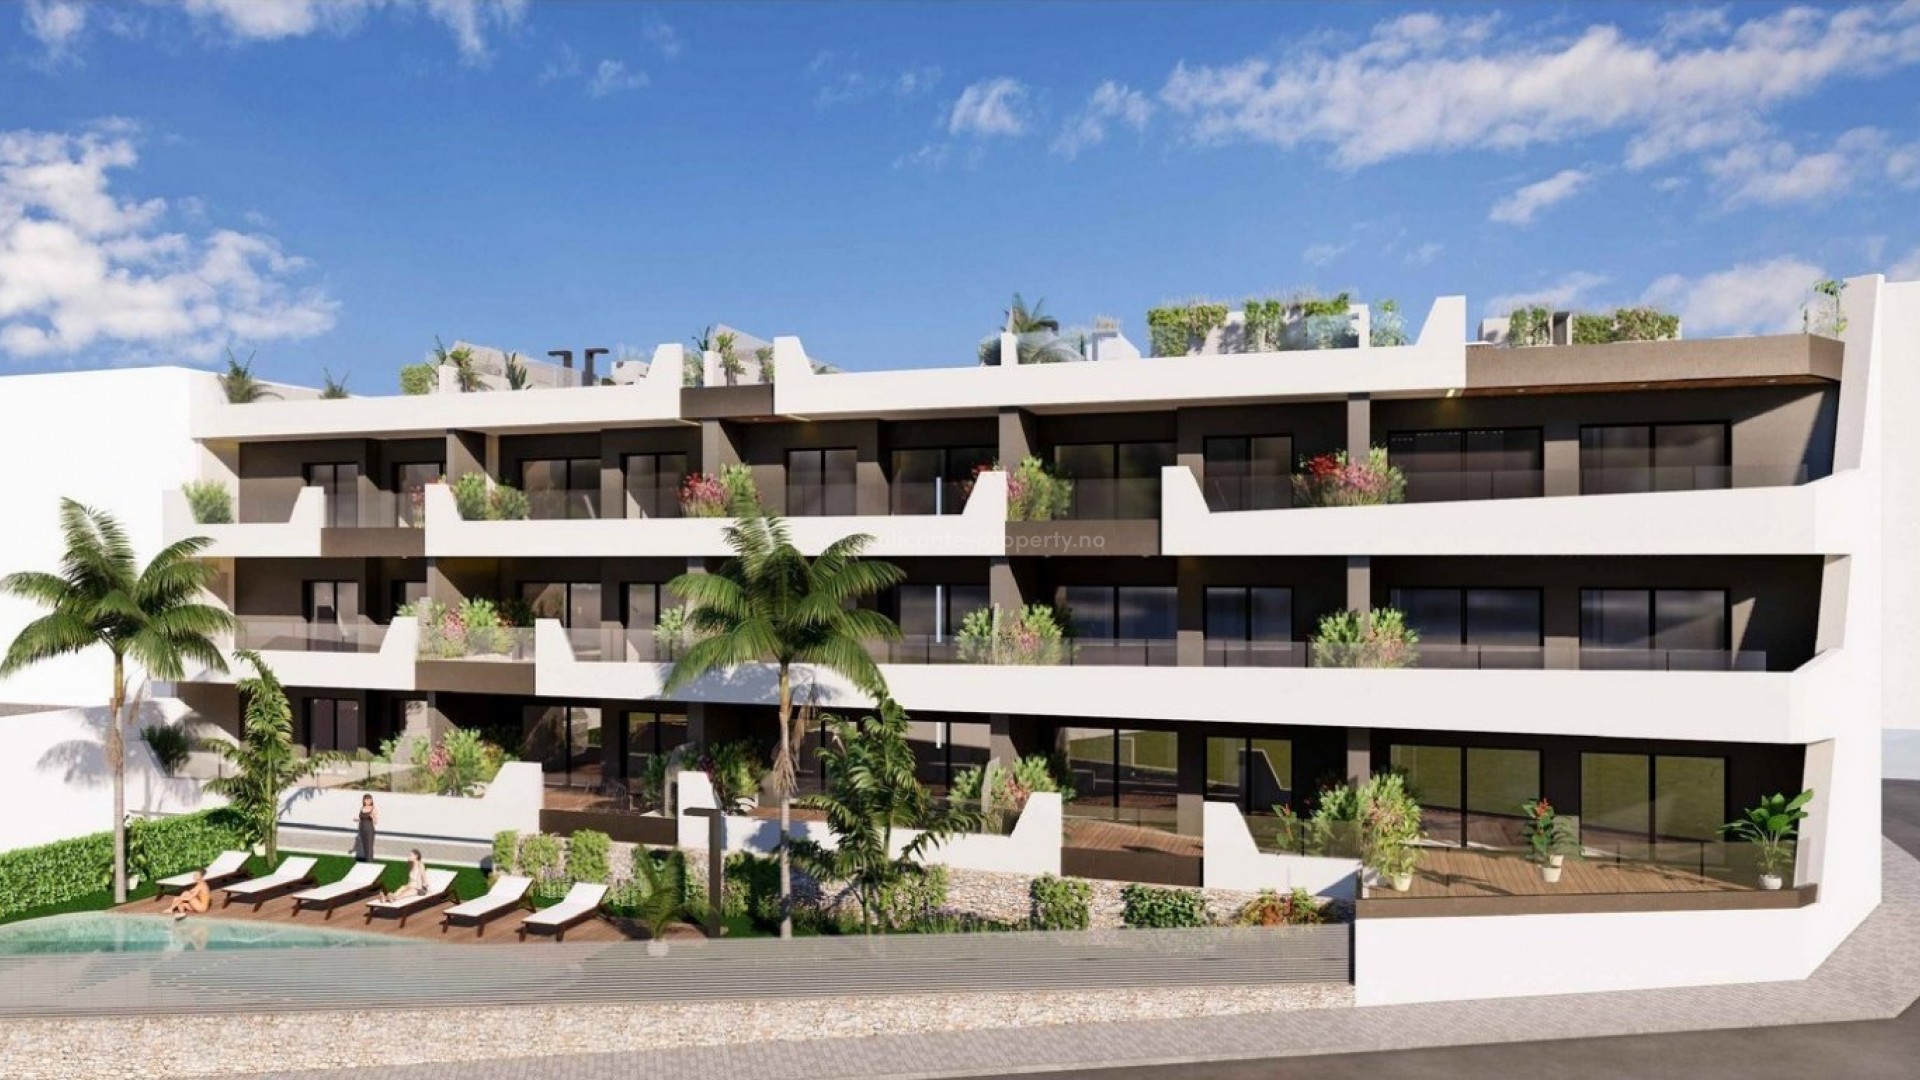 New properties of penthouse and apartments in Benijofar, 2/3 bedrooms, 2 bathrooms, large solarium and large green area with swimming pool, as well as parking and storage